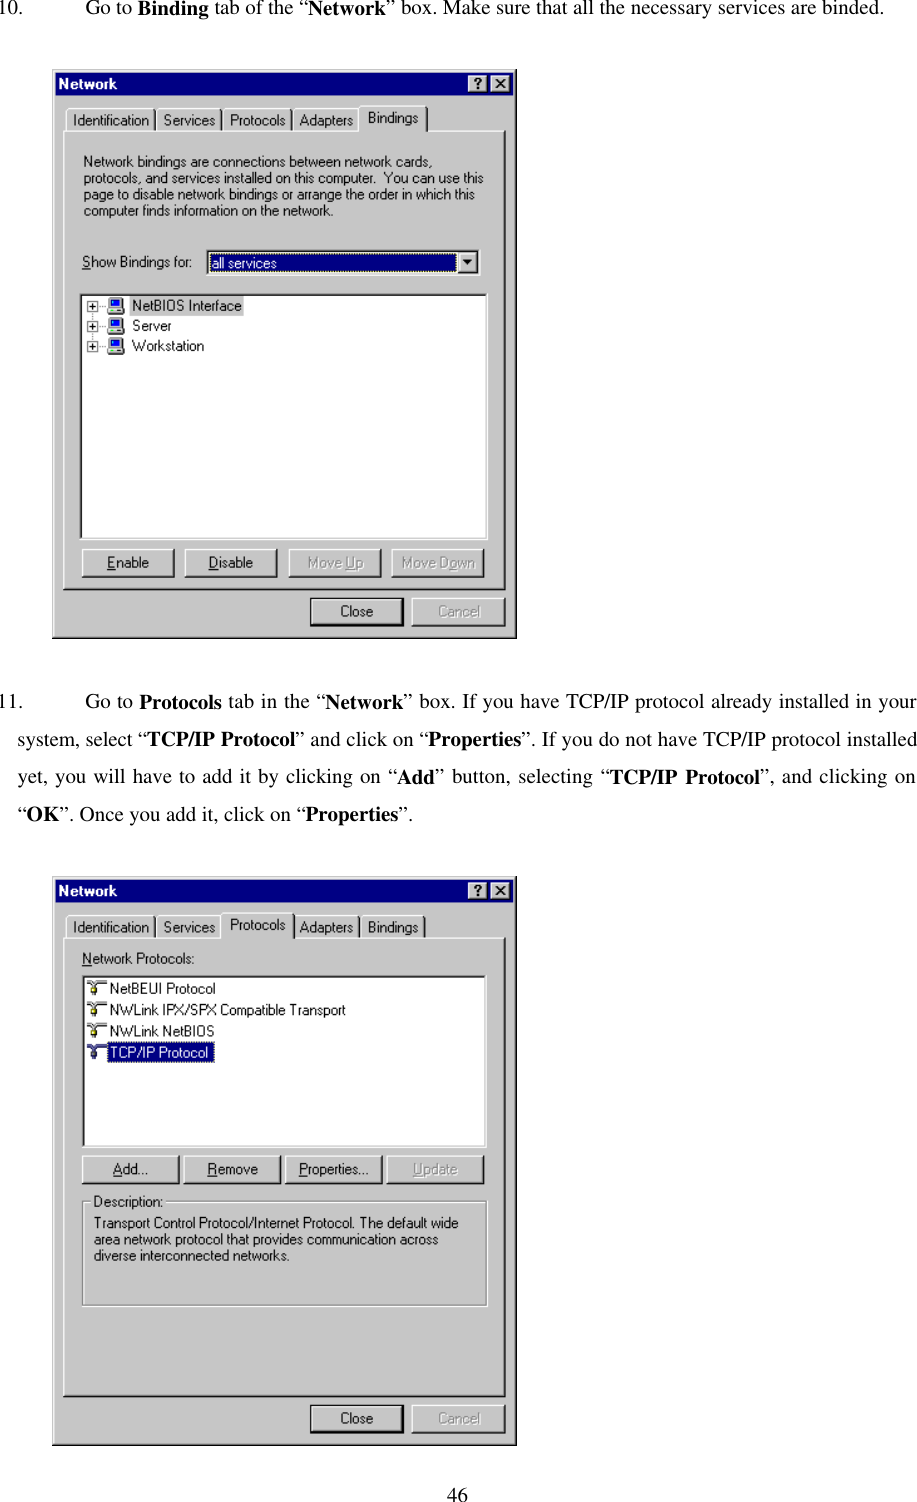  4610. Go to Binding tab of the “Network” box. Make sure that all the necessary services are binded.               11. Go to Protocols tab in the “Network” box. If you have TCP/IP protocol already installed in your system, select “TCP/IP Protocol” and click on “Properties”. If you do not have TCP/IP protocol installed yet, you will have to add it by clicking on “Add” button, selecting “TCP/IP Protocol”, and clicking on “OK”. Once you add it, click on “Properties”.              